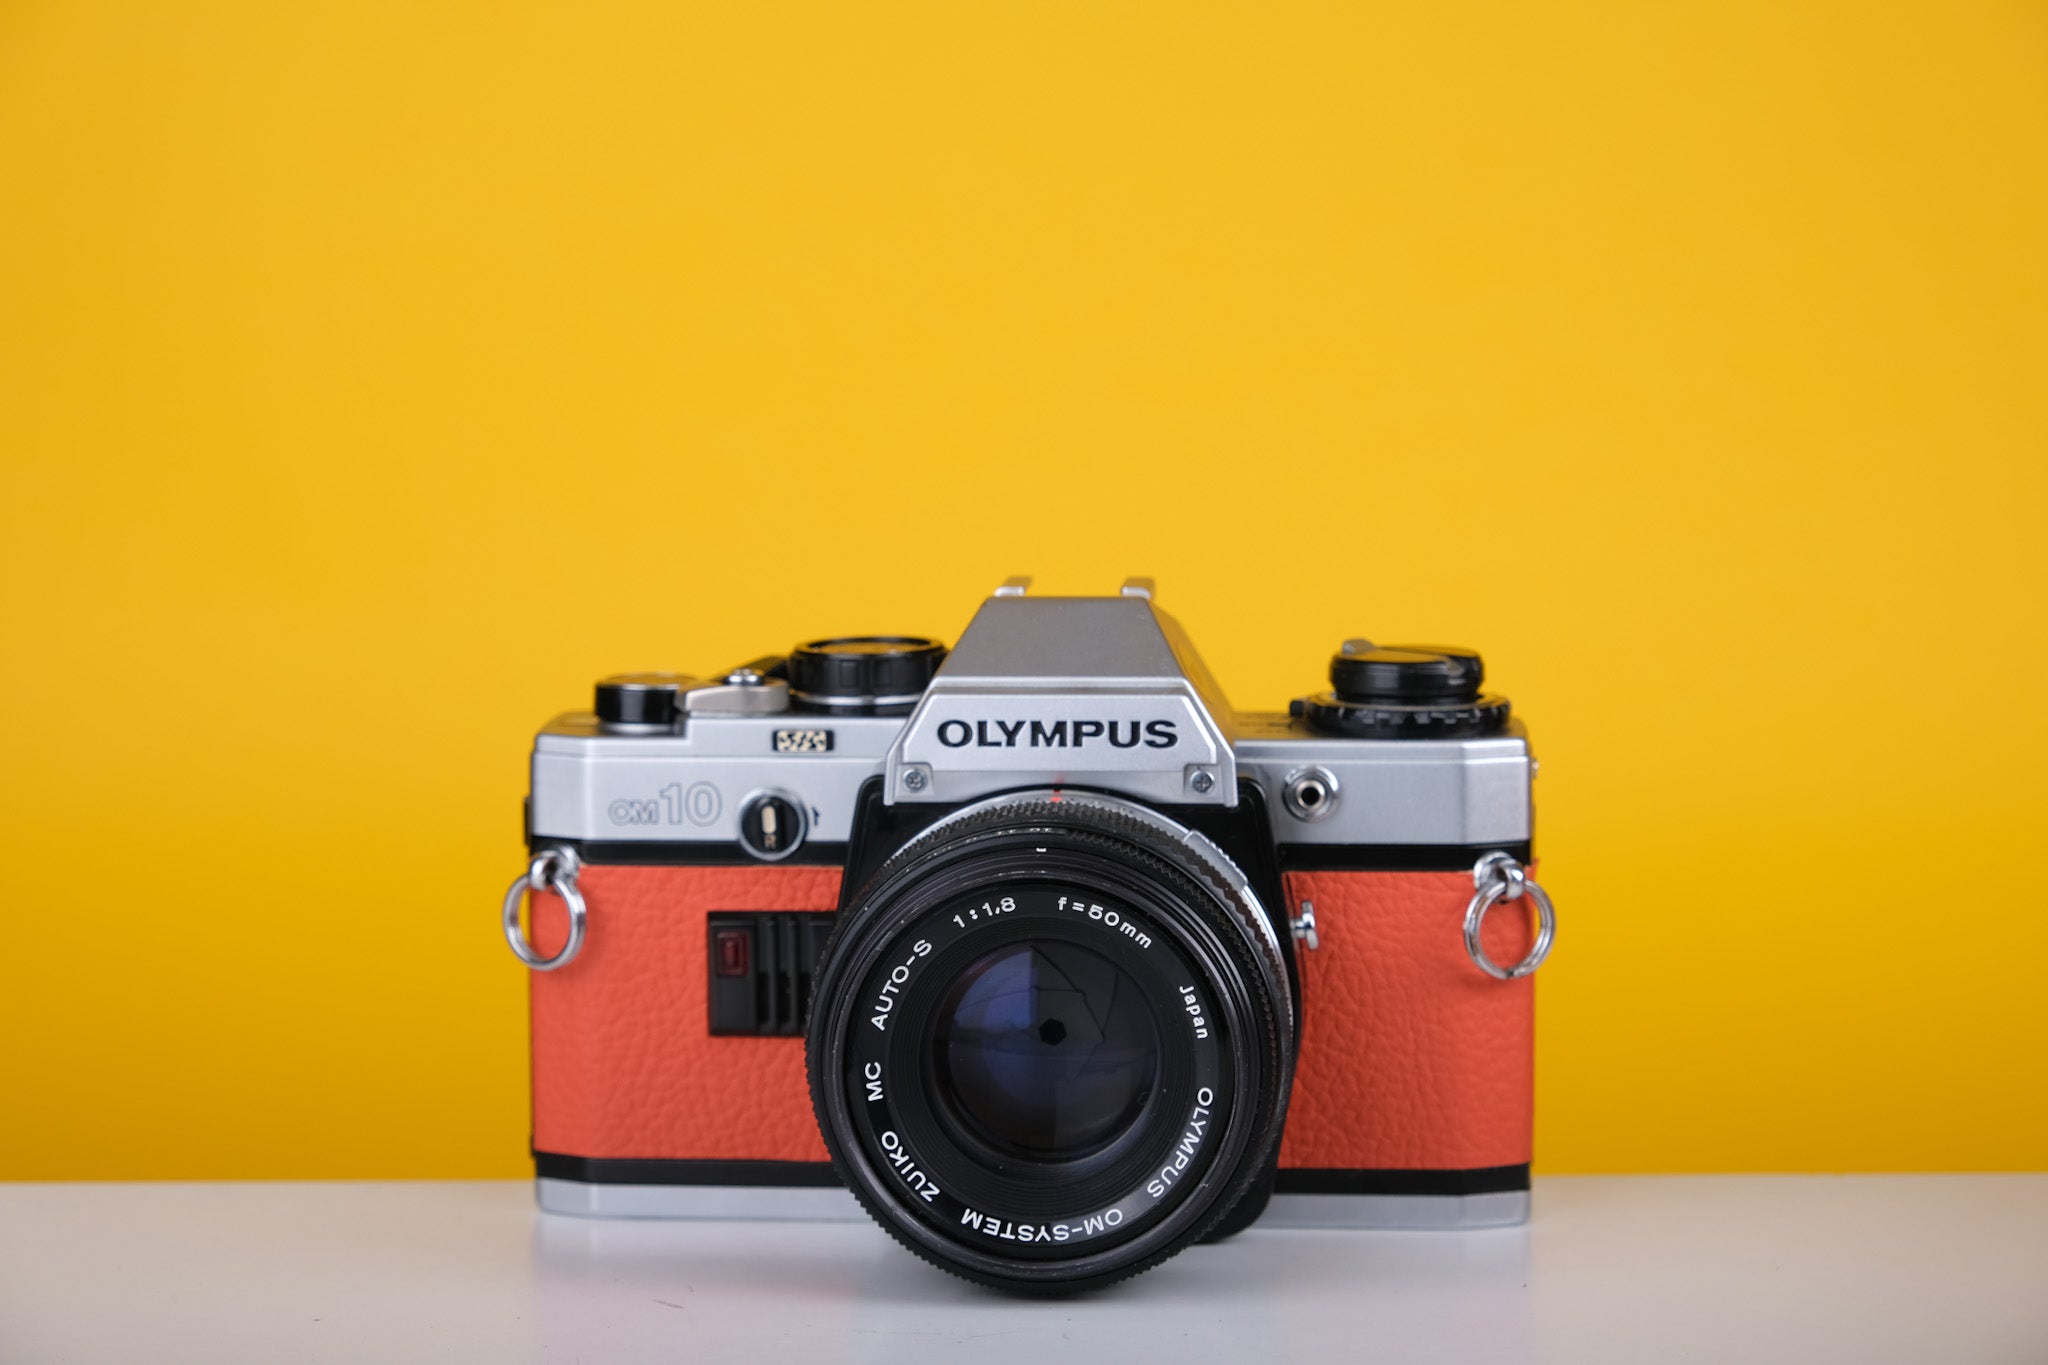 Olympus OM10 Vintage Film Camera with 50mm f/1.8 Lens With New